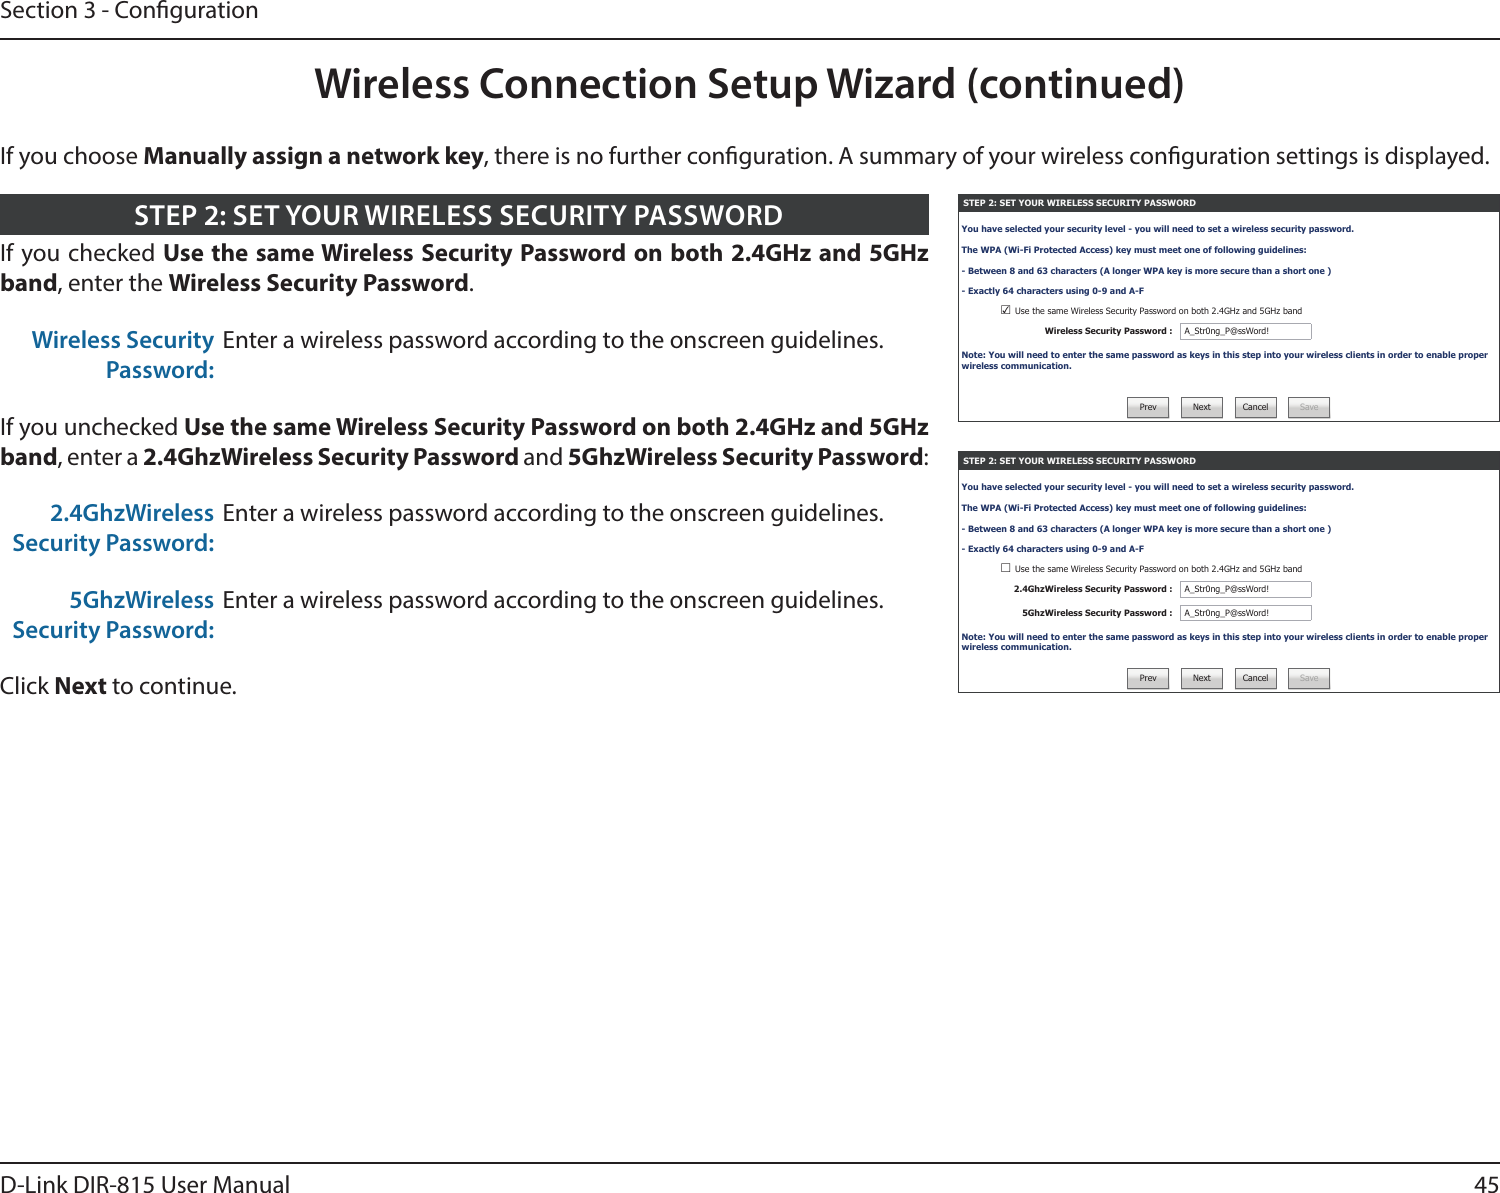 45D-Link DIR-815 User ManualSection 3 - CongurationWireless Connection Setup Wizard (continued)STEP 2: SET YOUR WIRELESS SECURITY PASSWORDYou have selected your security level - you will need to set a wireless security password.The WPA (Wi-Fi Protected Access) key must meet one of following guidelines:- Between 8 and 63 characters (A longer WPA key is more secure than a short one )- Exactly 64 characters using 0-9 and A-F☑ Use the same Wireless Security Password on both 2.4GHz and 5GHz bandWireless Security Password : A_Str0ng_P@ssWord!Note: You will need to enter the same password as keys in this step into your wireless clients in order to enable proper wireless communication.Prev Next Cancel SaveSTEP 2: SET YOUR WIRELESS SECURITY PASSWORDYou have selected your security level - you will need to set a wireless security password.The WPA (Wi-Fi Protected Access) key must meet one of following guidelines:- Between 8 and 63 characters (A longer WPA key is more secure than a short one )- Exactly 64 characters using 0-9 and A-F☐ Use the same Wireless Security Password on both 2.4GHz and 5GHz band2.4GhzWireless Security Password : A_Str0ng_P@ssWord!5GhzWireless Security Password : A_Str0ng_P@ssWord!Note: You will need to enter the same password as keys in this step into your wireless clients in order to enable proper wireless communication.Prev Next Cancel SaveIf you checked Use the same Wireless Security Password on both 2.4GHz and 5GHz band, enter the Wireless Security Password.Wireless Security Password:Enter a wireless password according to the onscreen guidelines.If you unchecked Use the same Wireless Security Password on both 2.4GHz and 5GHz band, enter a 2.4GhzWireless Security Password and 5GhzWireless Security Password:2.4GhzWireless Security Password:Enter a wireless password according to the onscreen guidelines.5GhzWireless Security Password:Enter a wireless password according to the onscreen guidelines.Click Next to continue.STEP 2: SET YOUR WIRELESS SECURITY PASSWORDIf you choose Manually assign a network key, there is no further conguration. A summary of your wireless conguration settings is displayed.